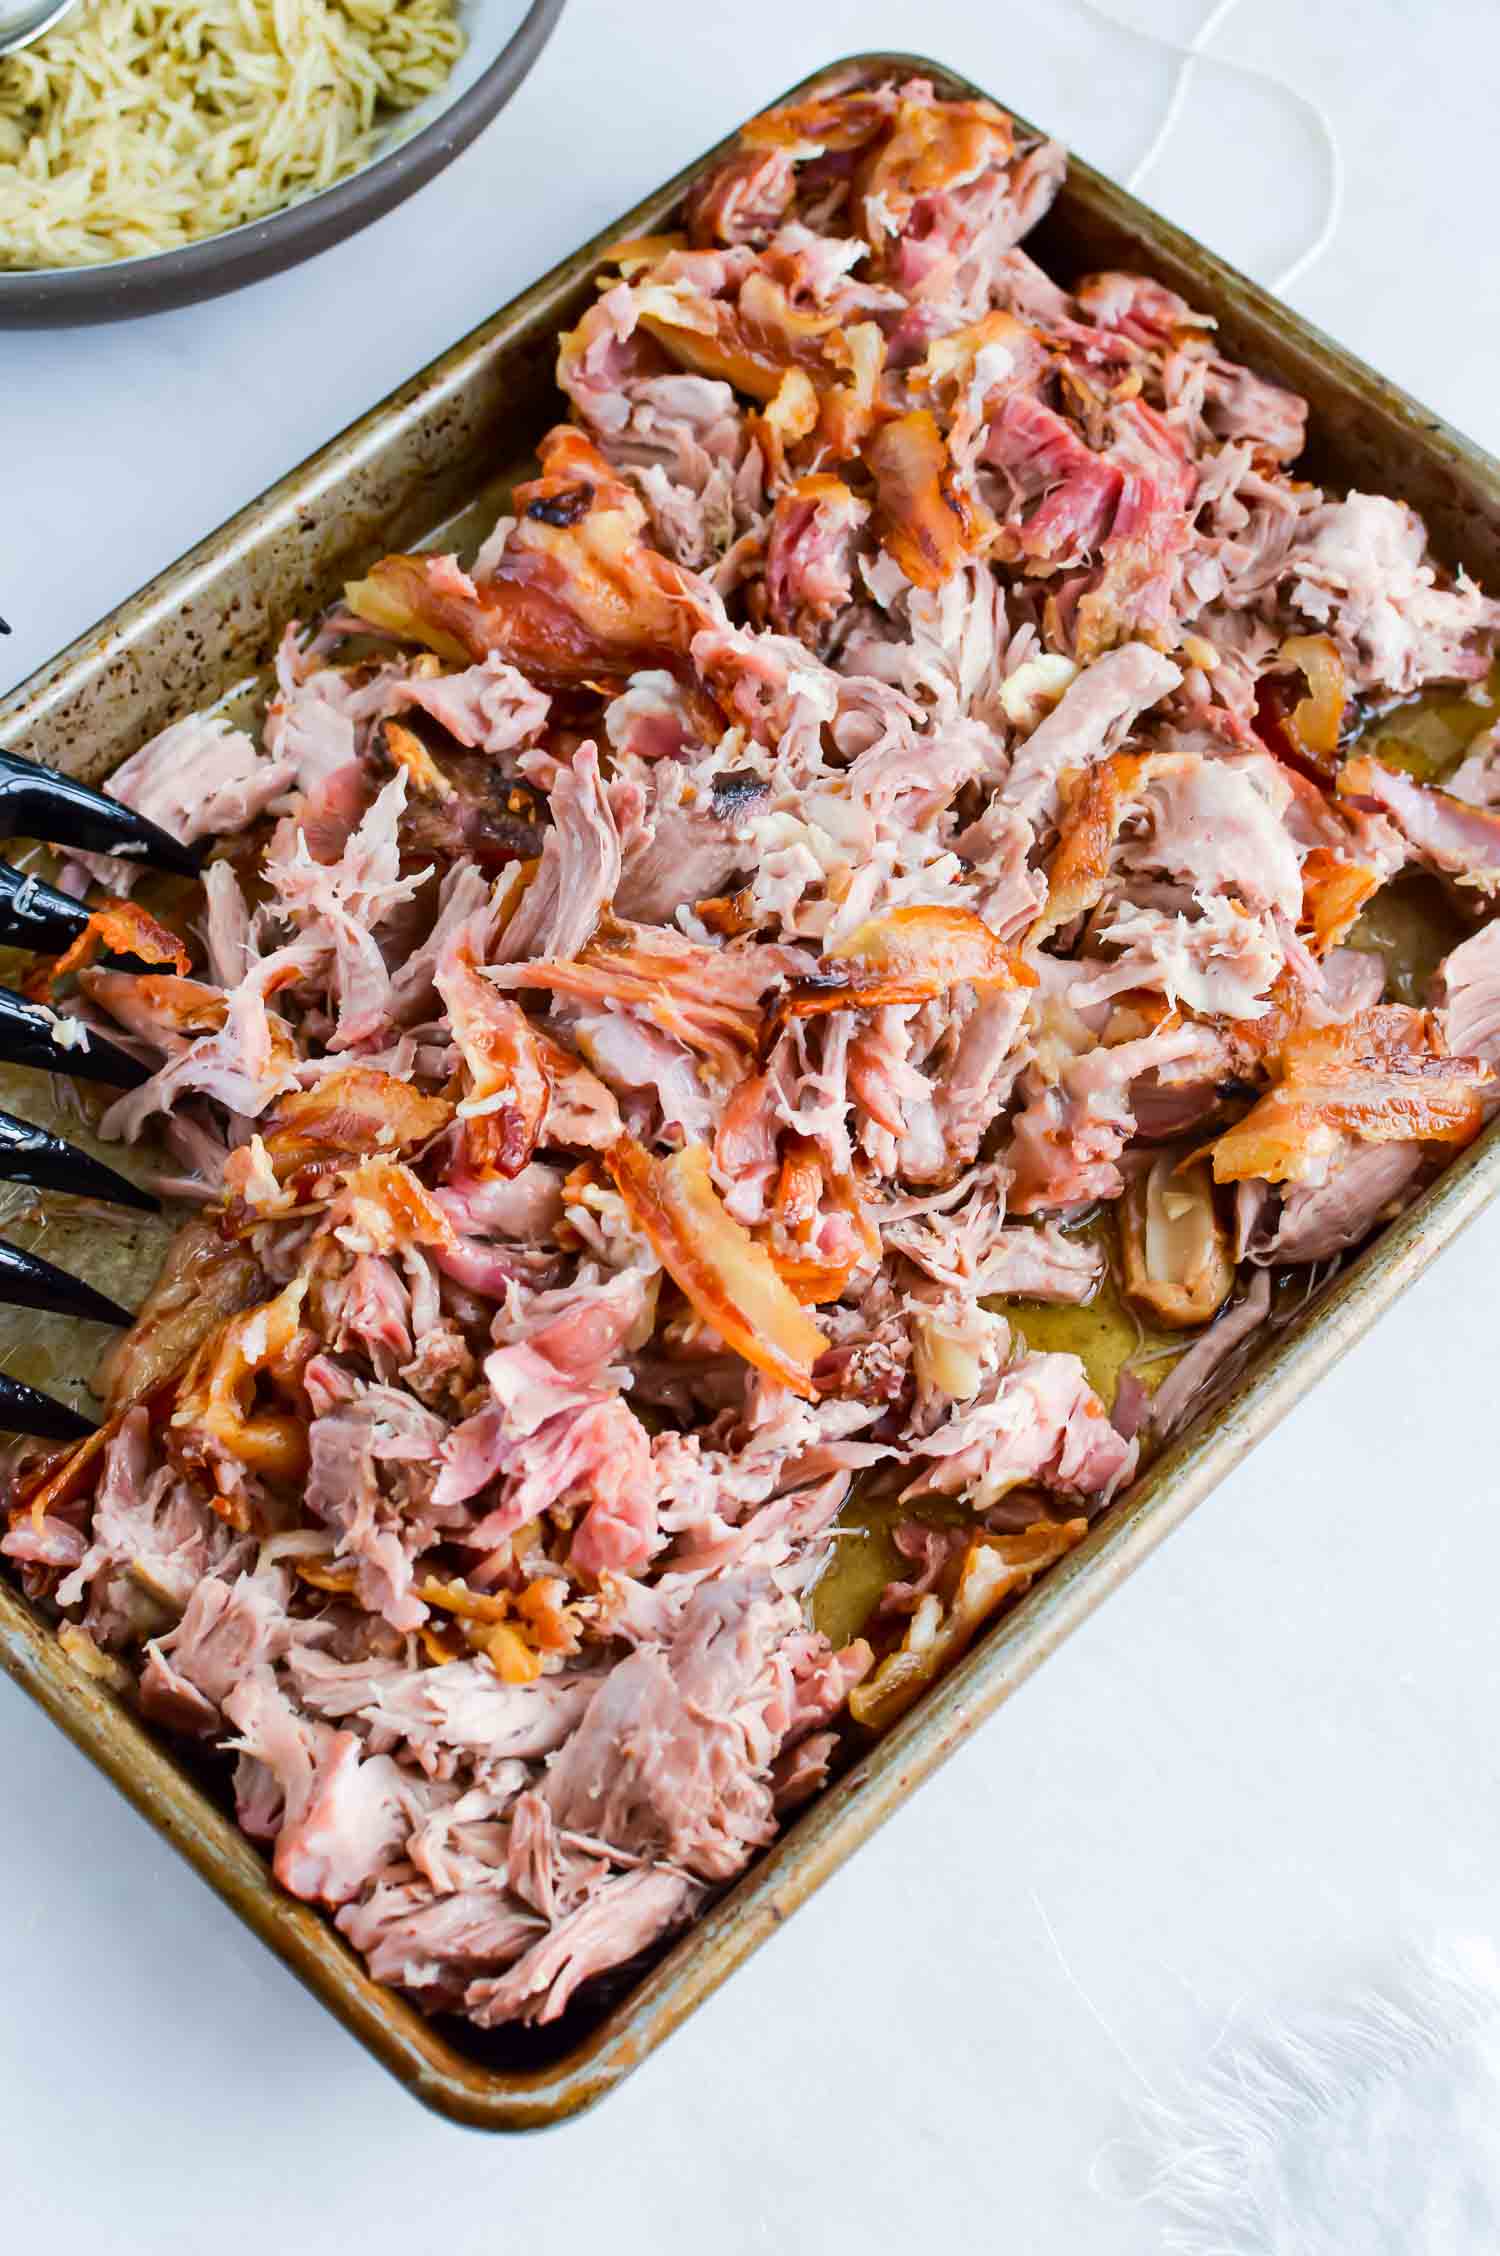 A pan of shredded pork and bacon pieces with a claw on the side.